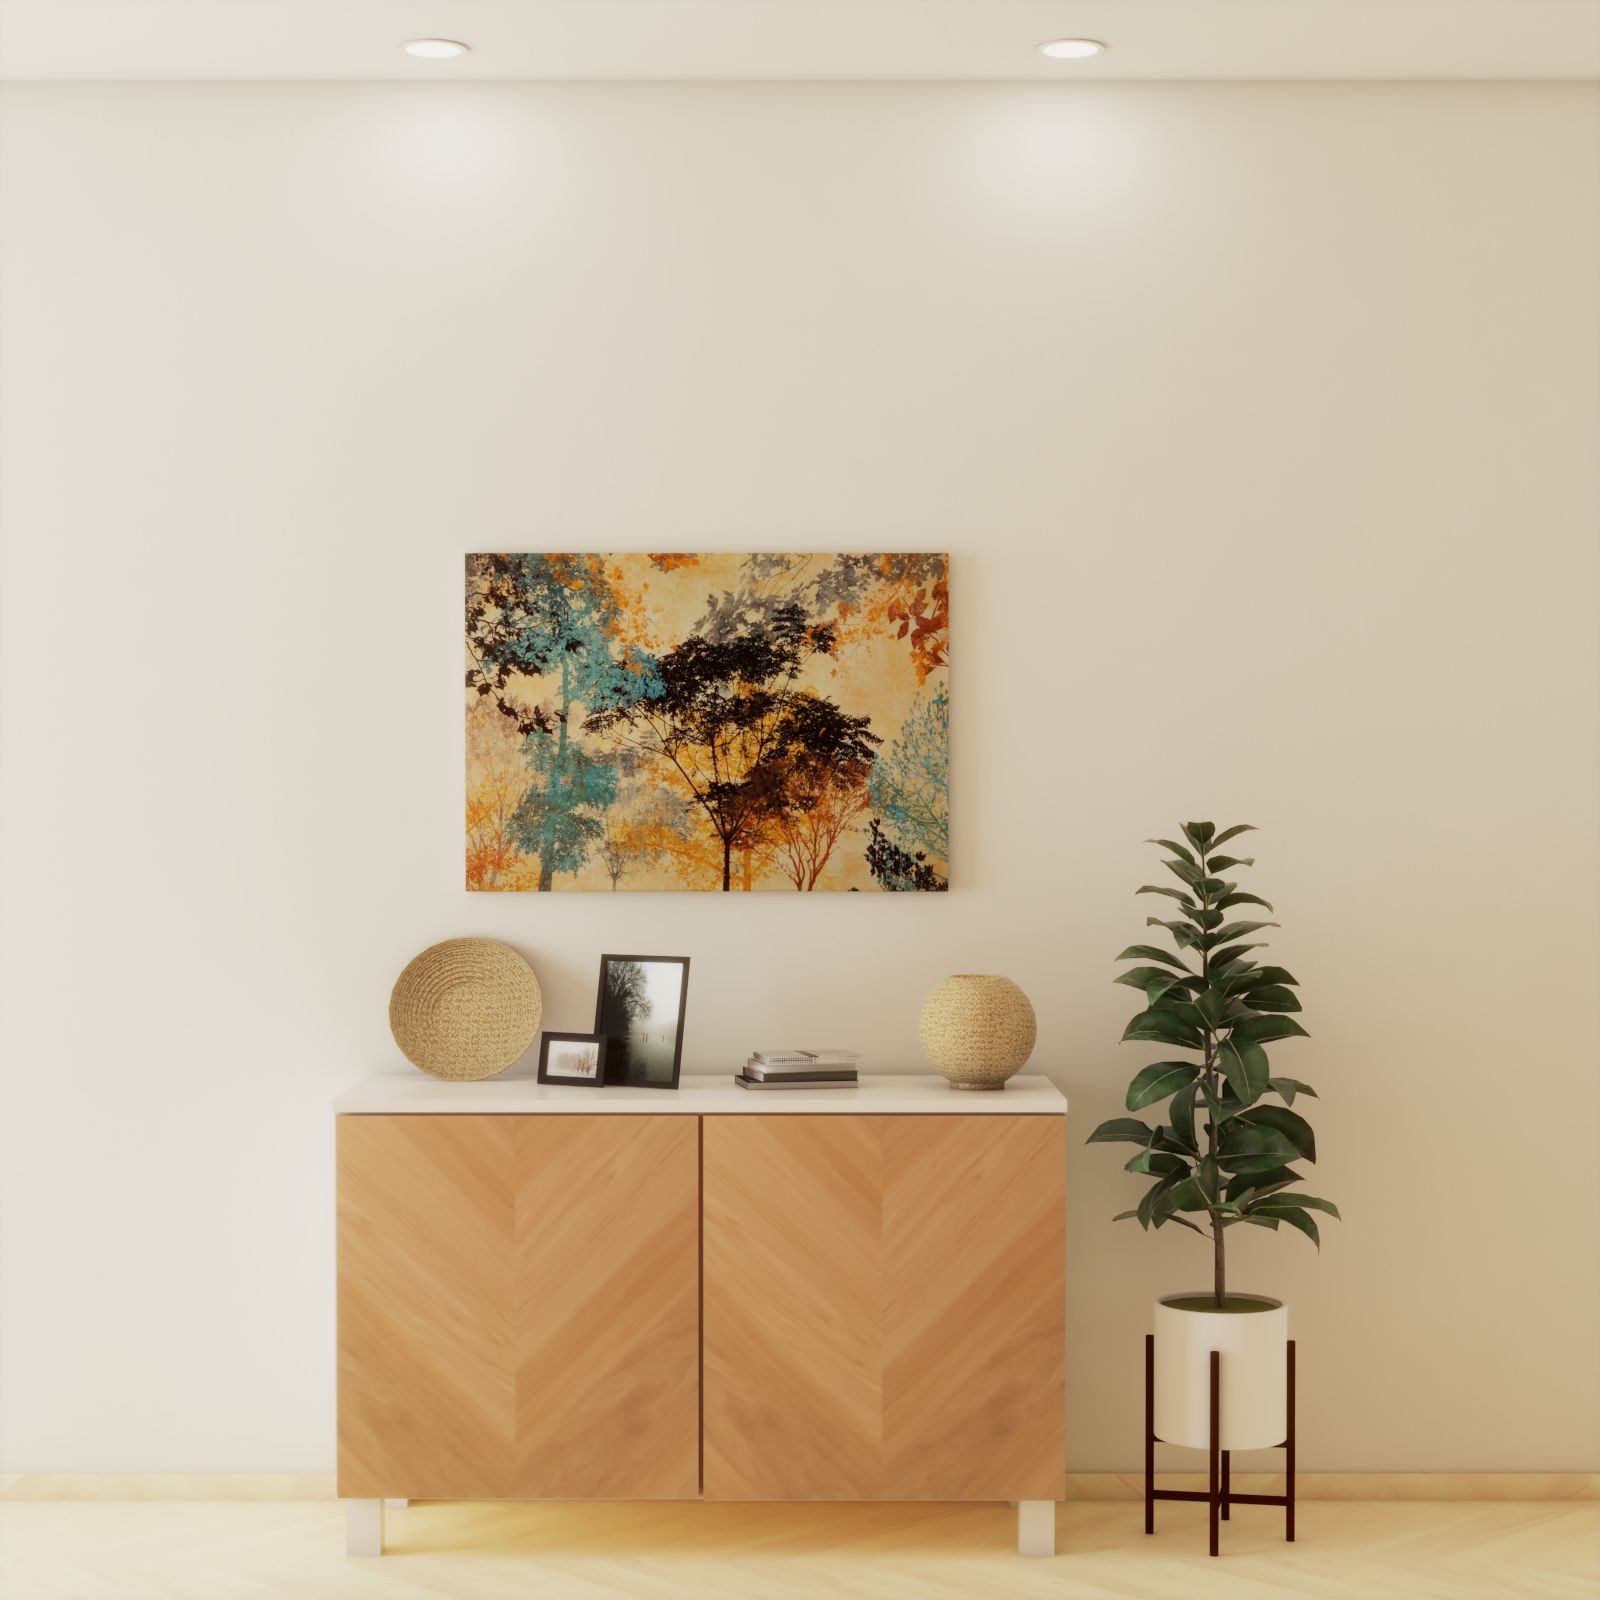 Contemporary Style Foyer With Abstract Painting Design